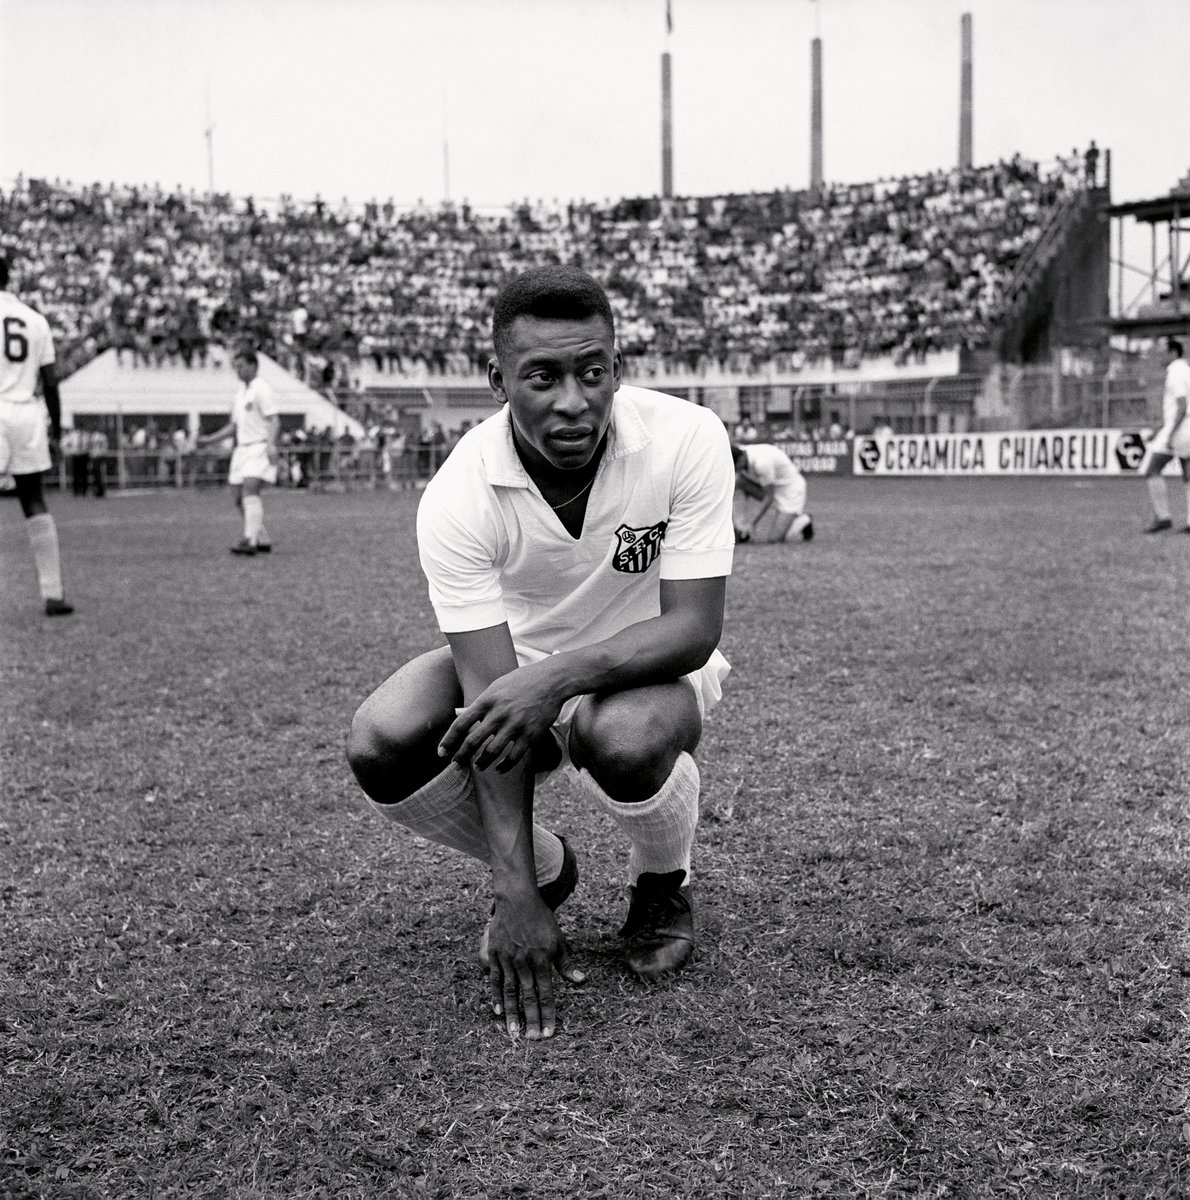 We were asked to play a friendly match on Benin City, in the middle of a Civil War, but Santos was so beloved that they agreed on a ceasefire on the matchday. It became known as the day that "Santos stopped the war" 